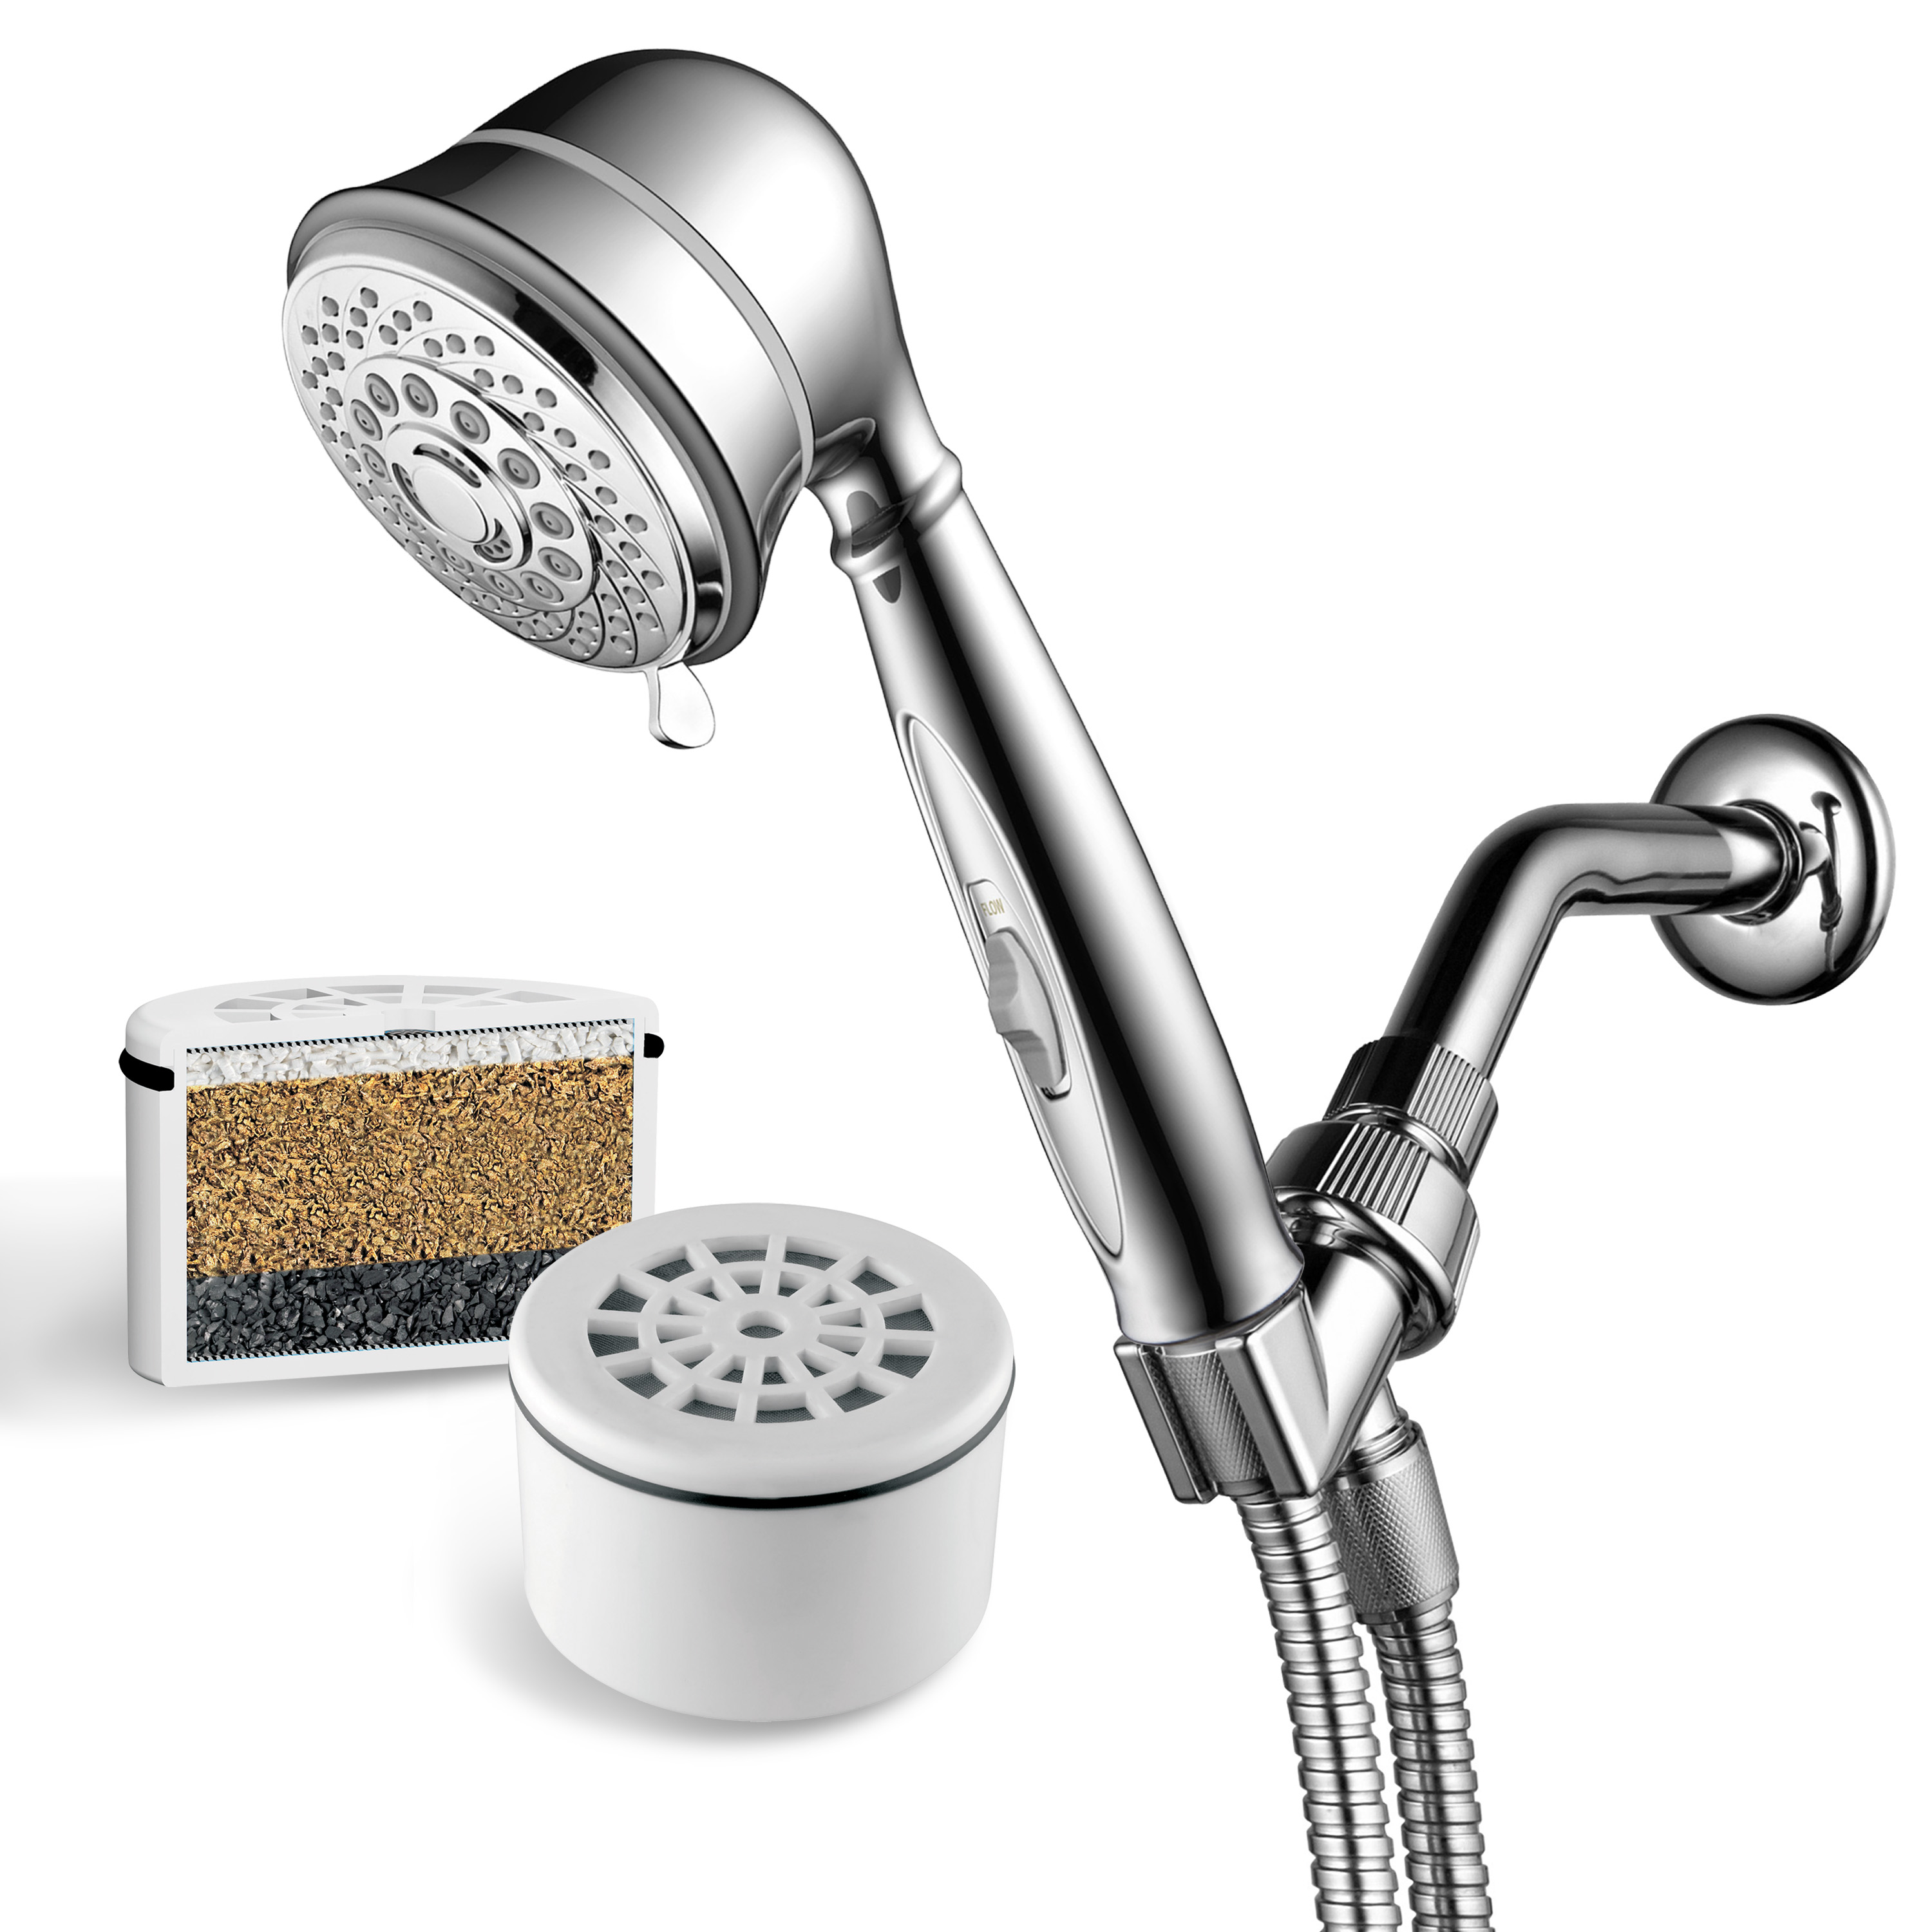 HotelSpa AquaCare 7-Setting, 3-Stage Filtered Handheld Shower Head, Chrome - image 1 of 8